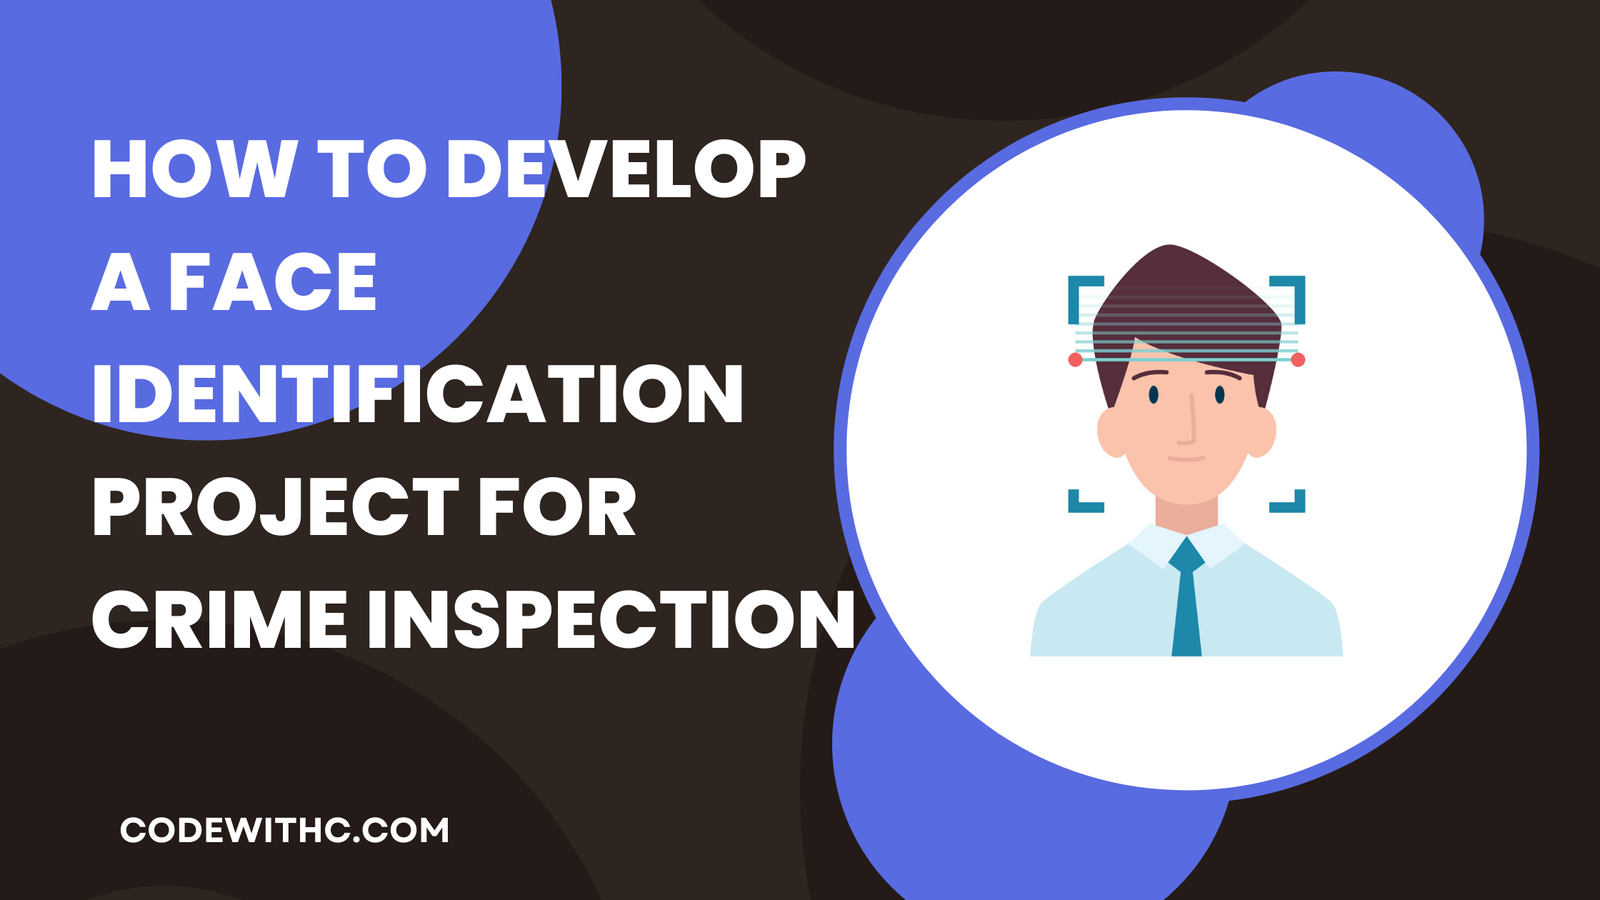 How to Develop Face Identification Project for Crime Inspection